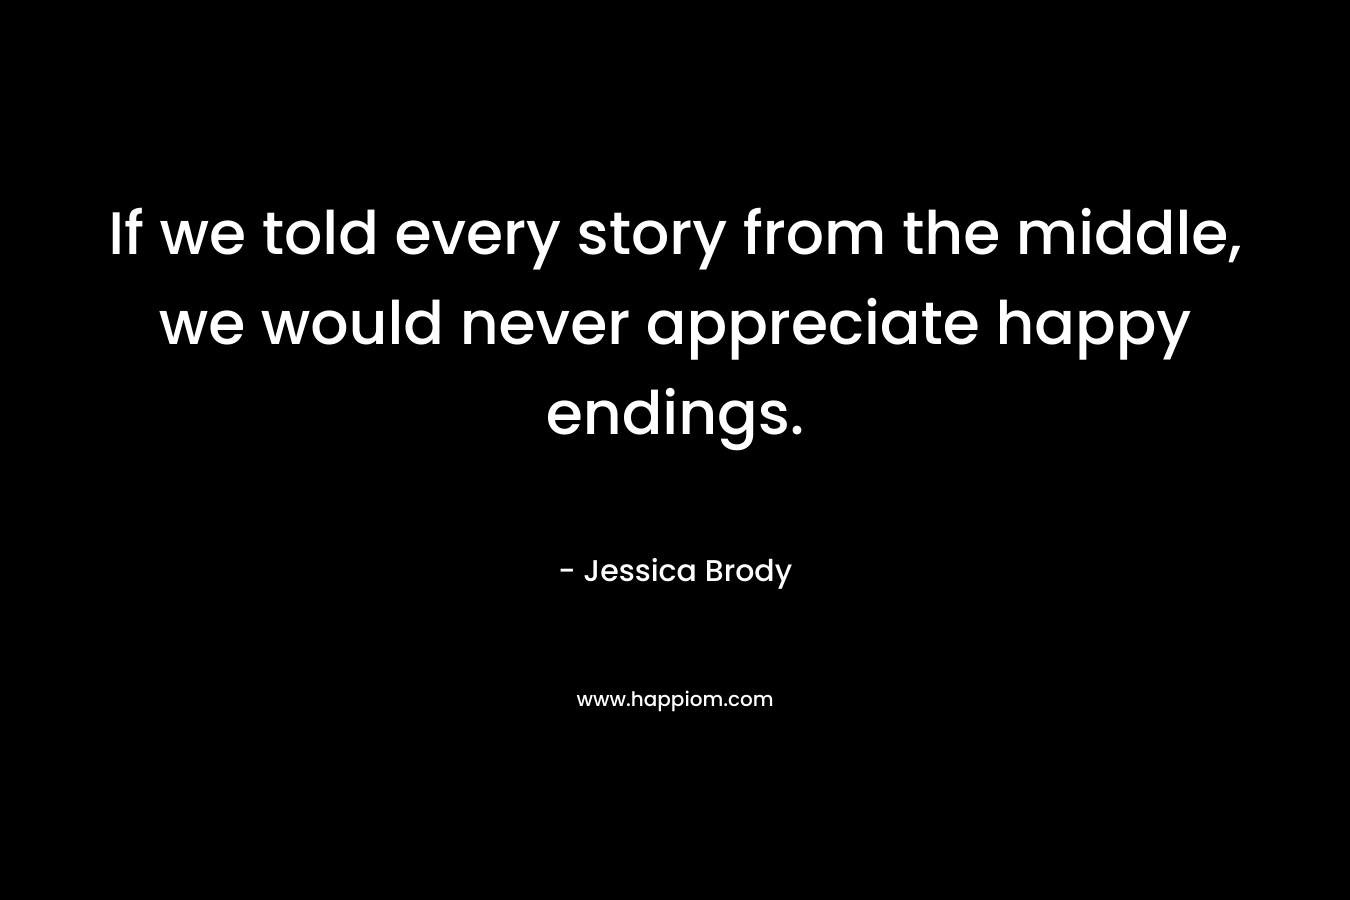 If we told every story from the middle, we would never appreciate happy endings. – Jessica Brody